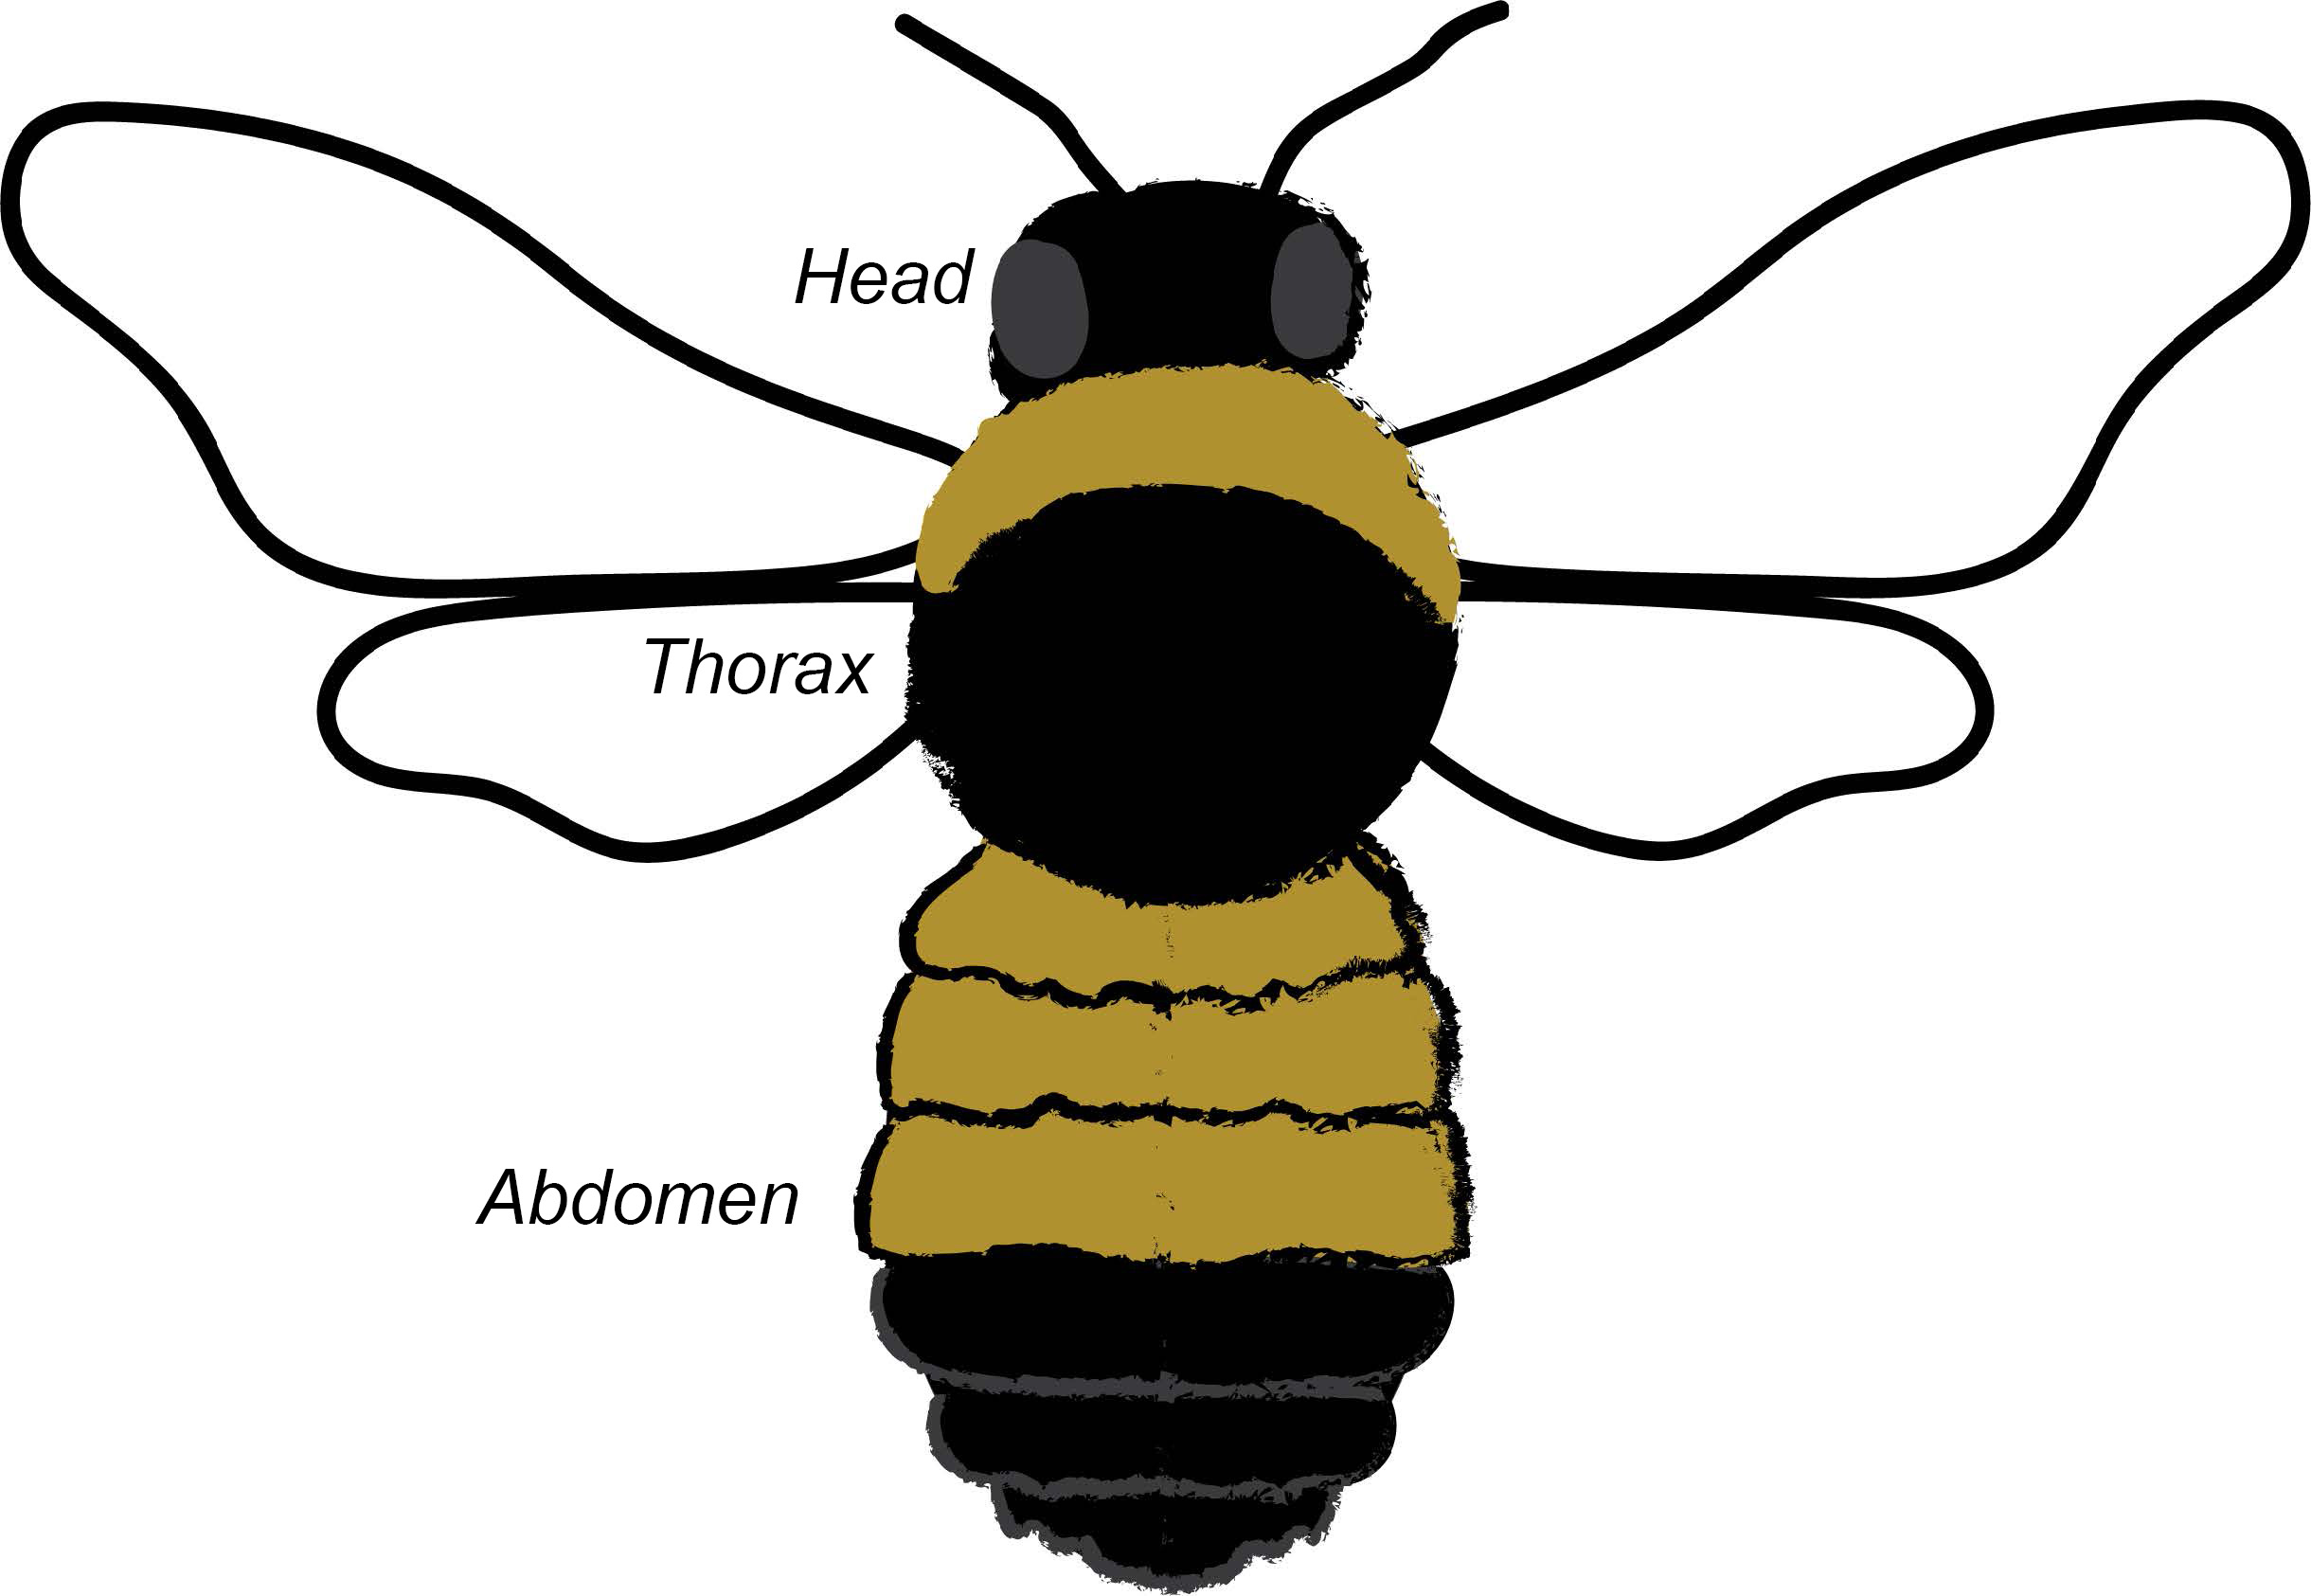 A yellow and black bee with the head, thorax and abdomen labeled.